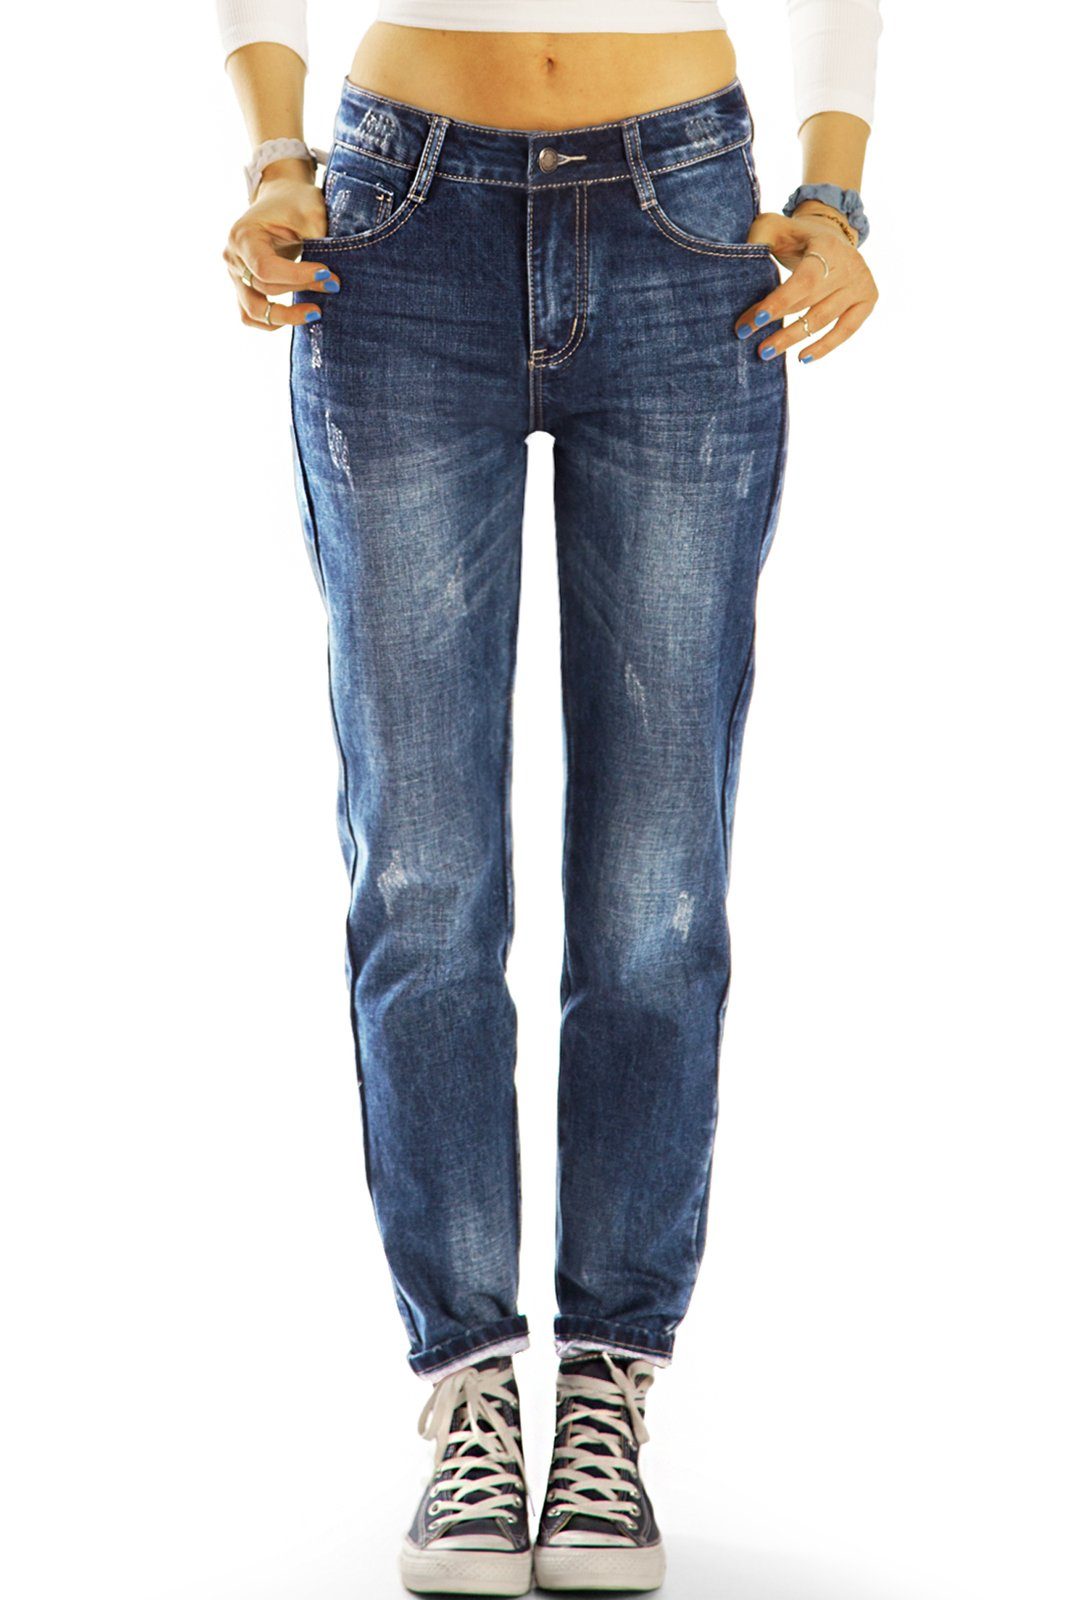 5-Pocket-Style Tapered Baggyjeans Bequem Tapered-fit-Jeans - - Boyfriend j9f - Hose Locker be styled fit Damen